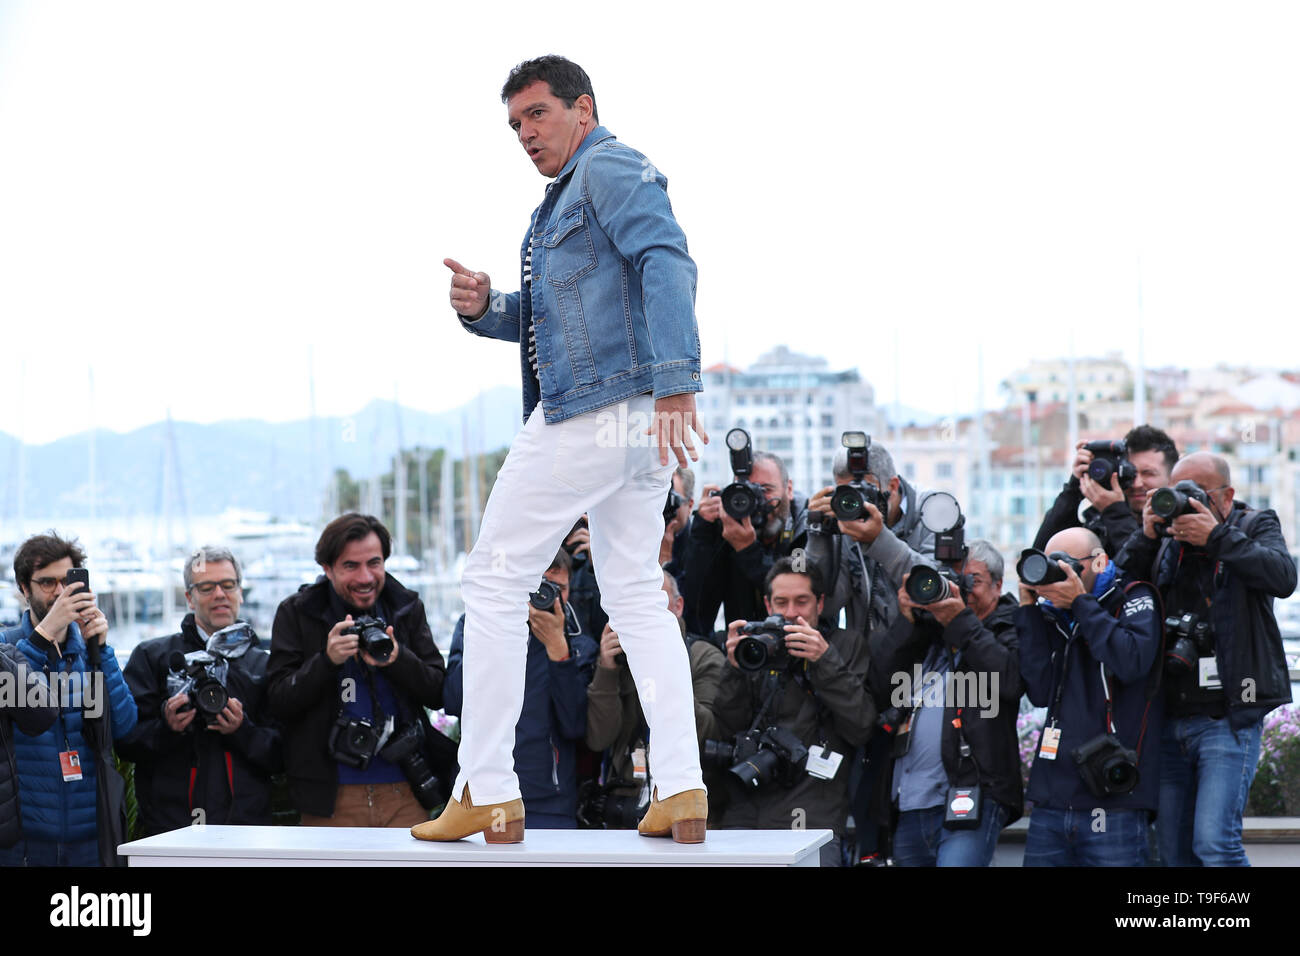 Cannes, France. 18th May, 2019. Actor Antonio Banderas poses during a photocall for the film 'Dolor y Gloria' at the 72nd Cannes Film Festival in Cannes, France, May 18, 2019. Spanish film 'Dolor y Gloria' will compete for the Palme d'Or with other 20 feature films during the 72nd Cannes Film Festival which is held from May 14 to 25. Credit: Zhang Cheng/Xinhua/Alamy Live News Credit: Xinhua/Alamy Live News Stock Photo